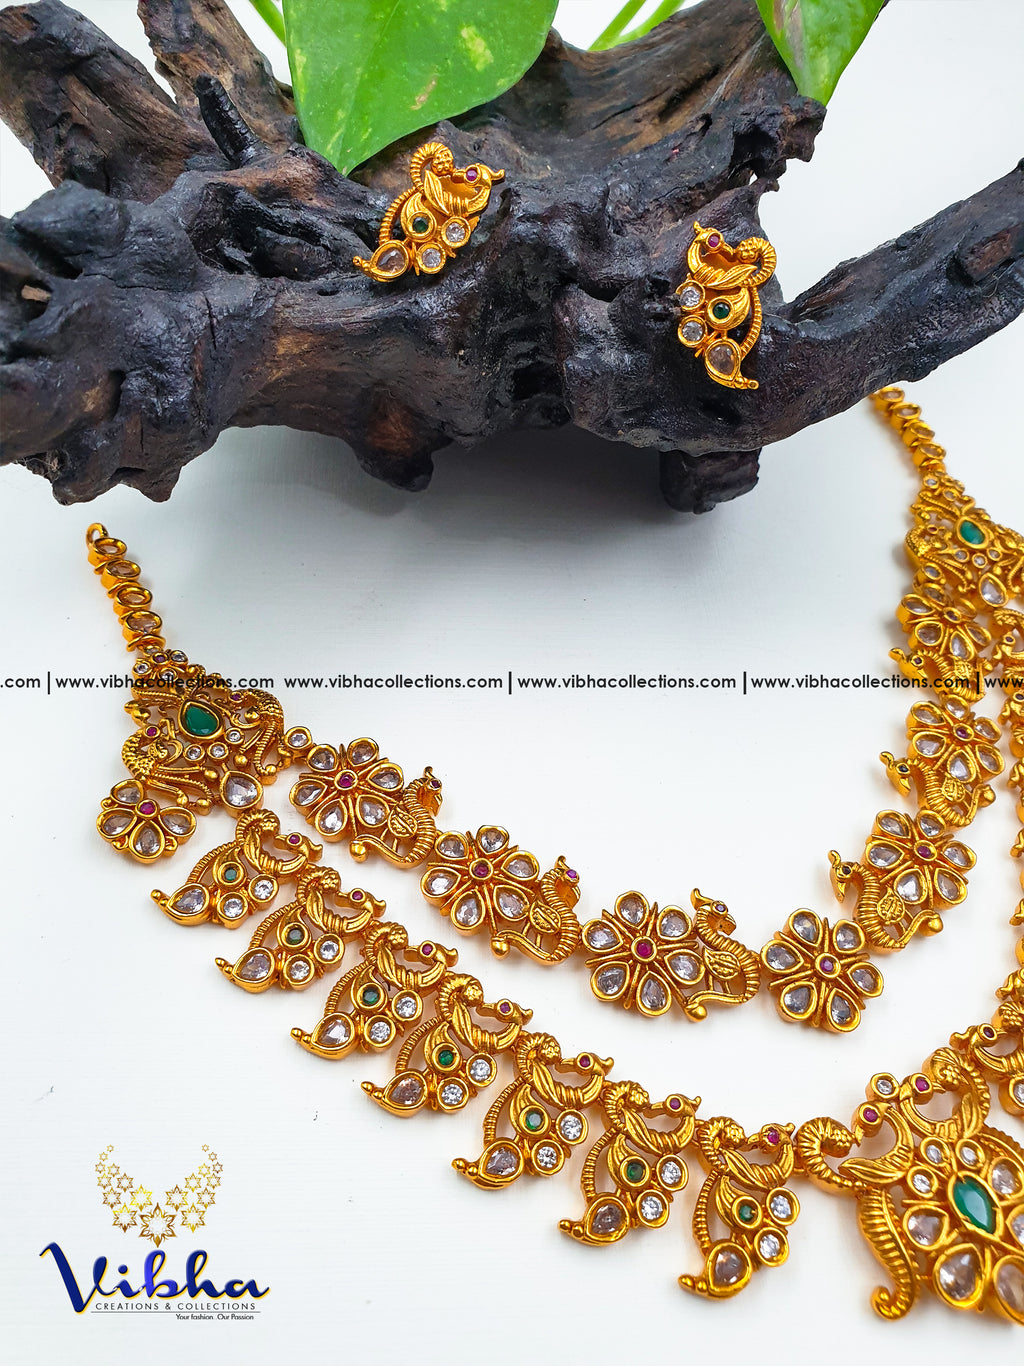 Kinjal Peacock design necklace with earrings - VCCNE5322